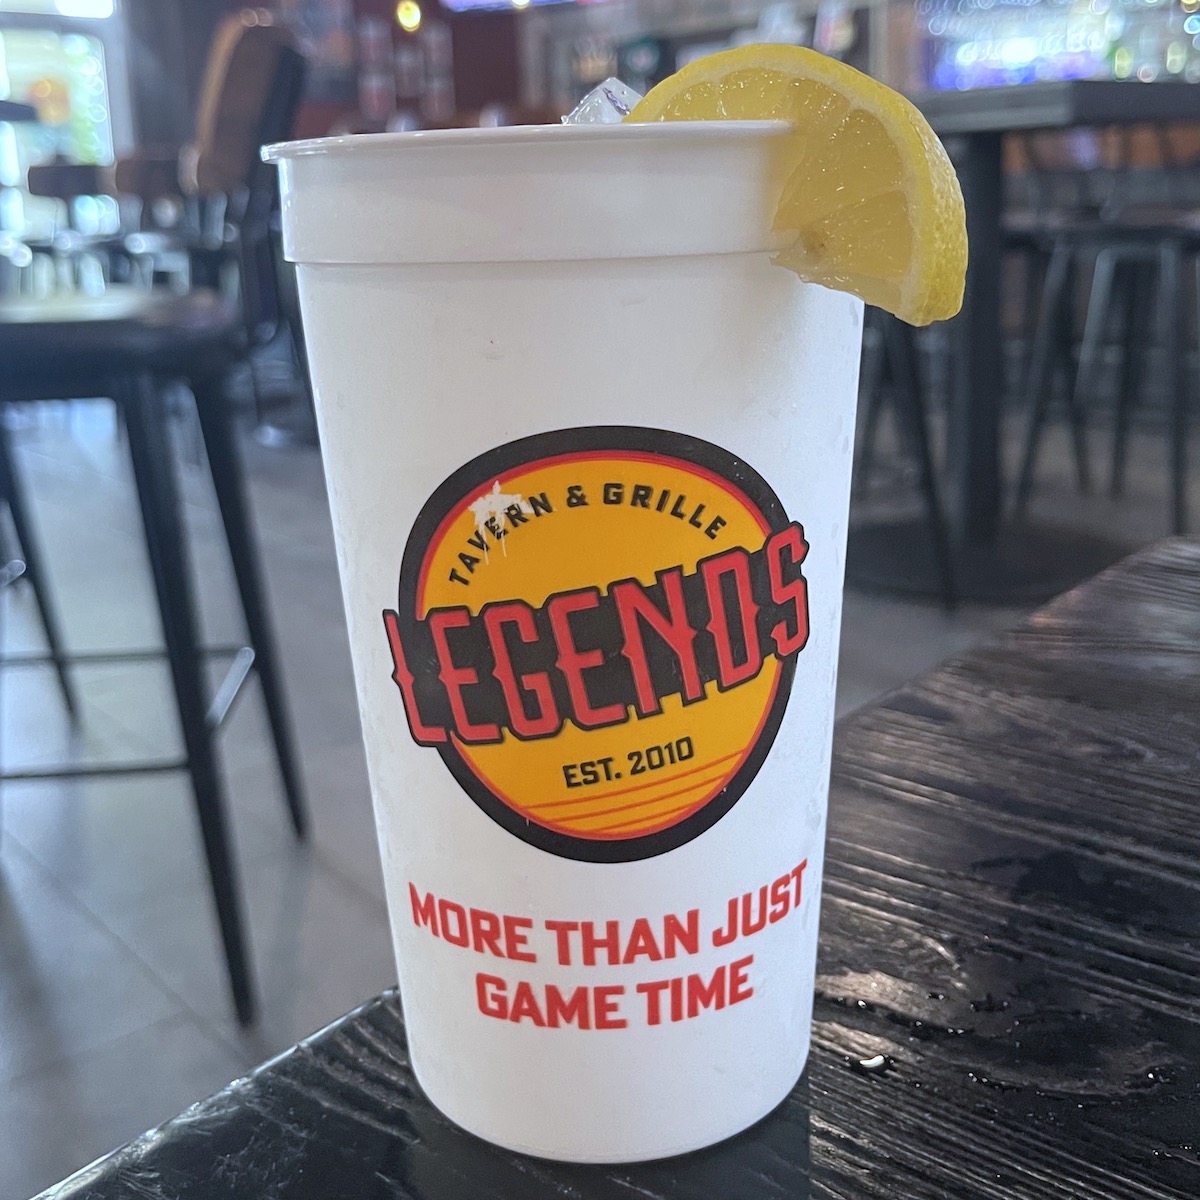 Refillable Cup from Legends Tavern Grille in Plantation, Florida